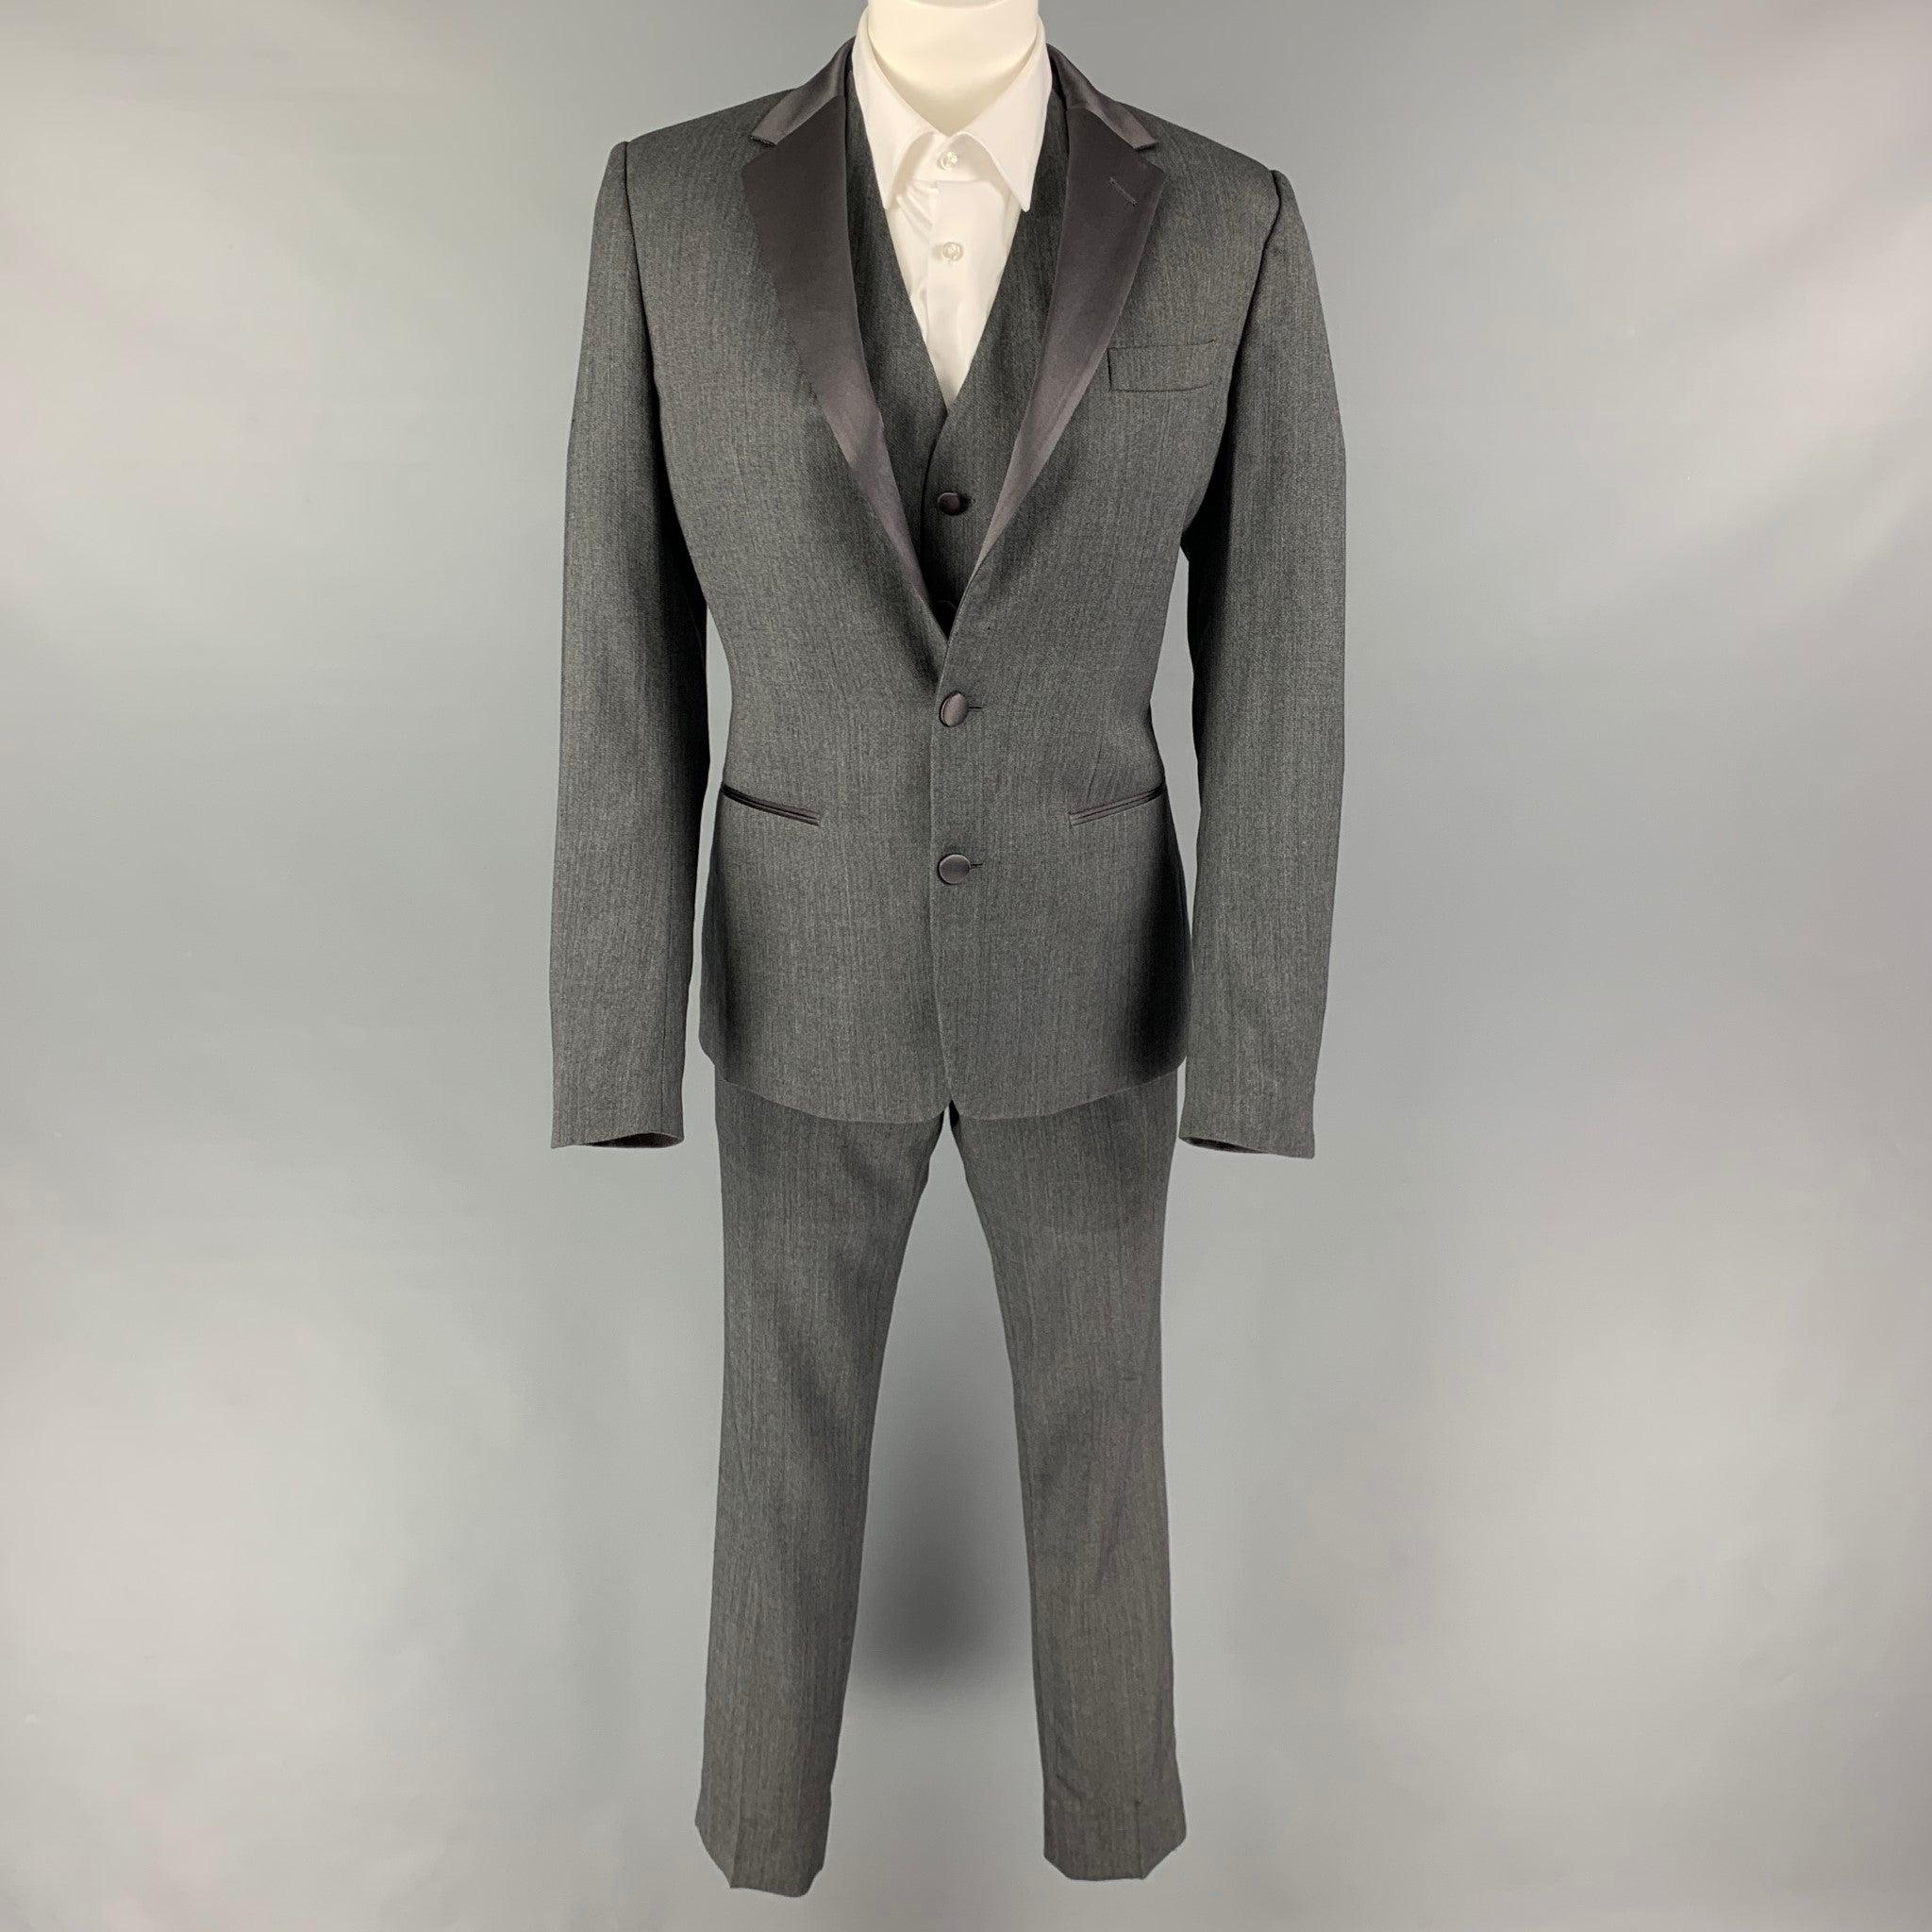 DOLCE & GABBANA Size 36 Grey Wool Silk Notch Lapel Tuxedo Suit In Excellent Condition For Sale In San Francisco, CA